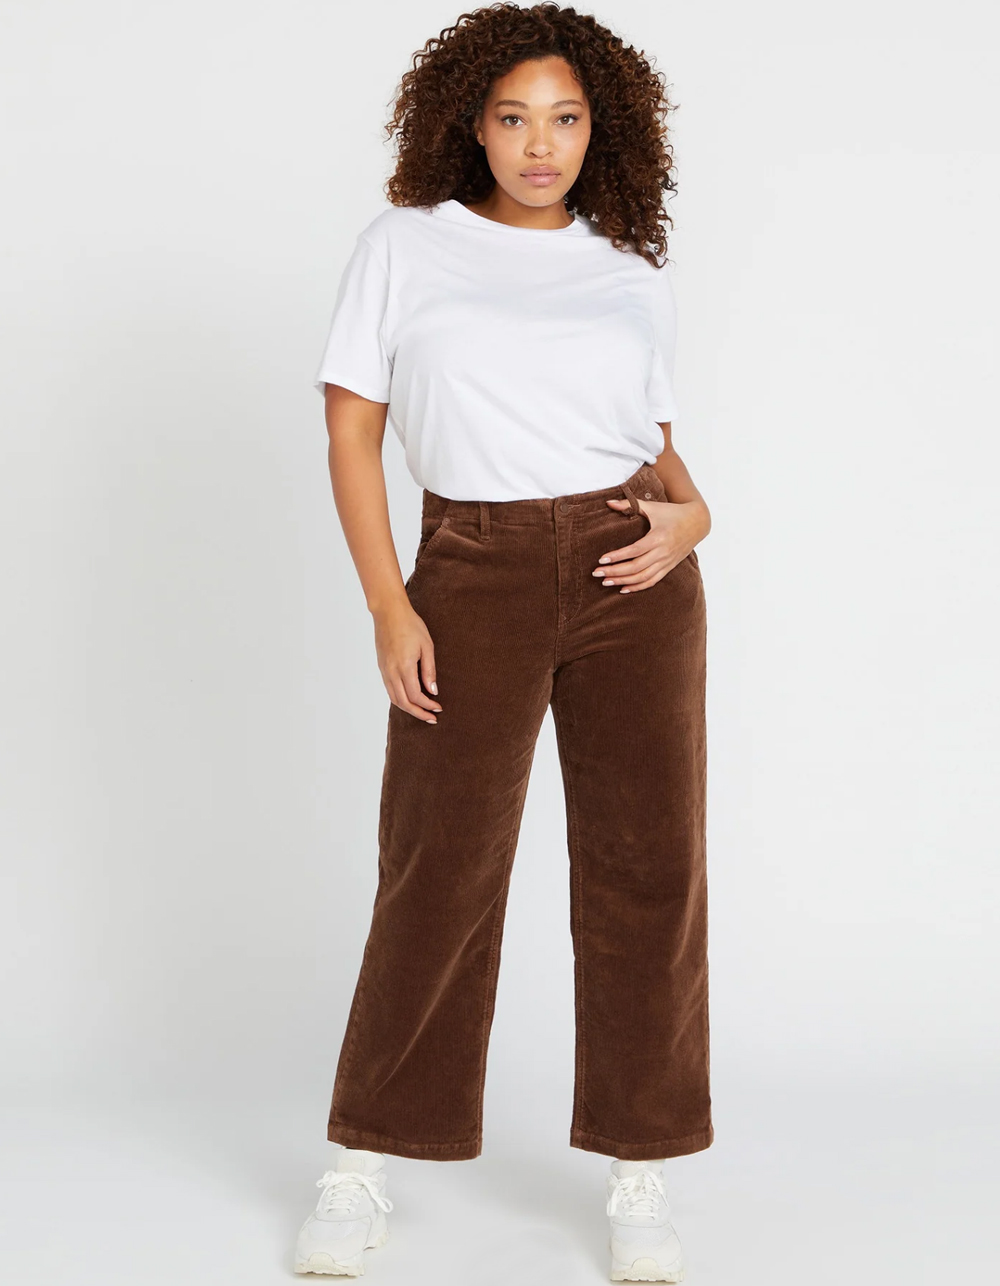 VOLCOM 1991 Stoned Womens Low Rise Corduroy Pants - BROWN | Tillys